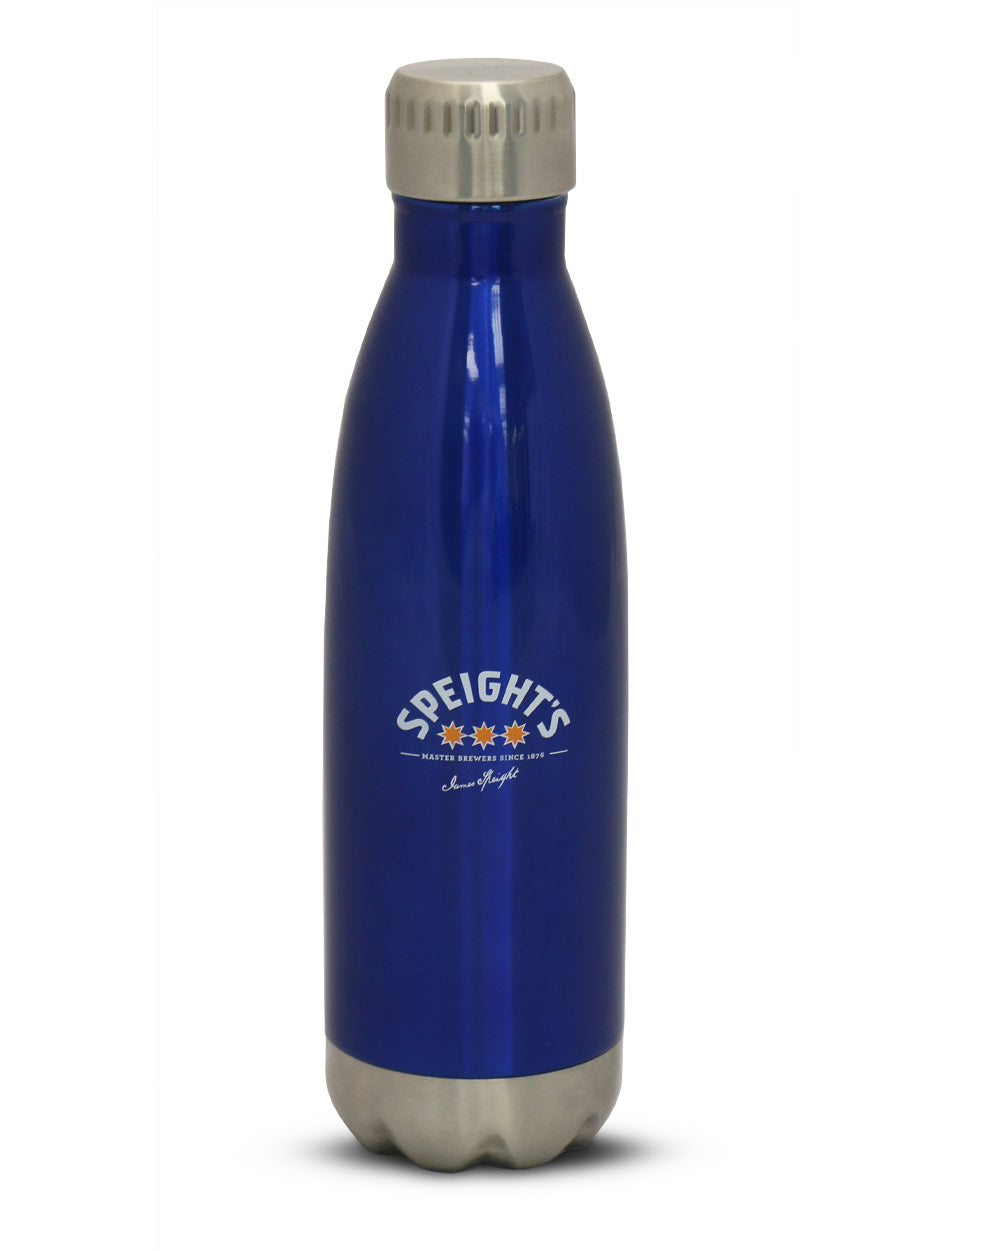 Speight's Vacuum Bottle -  Beer Gear Apparel & Merchandise - Speights - Lion Red - VB - Tokyo Dy merch